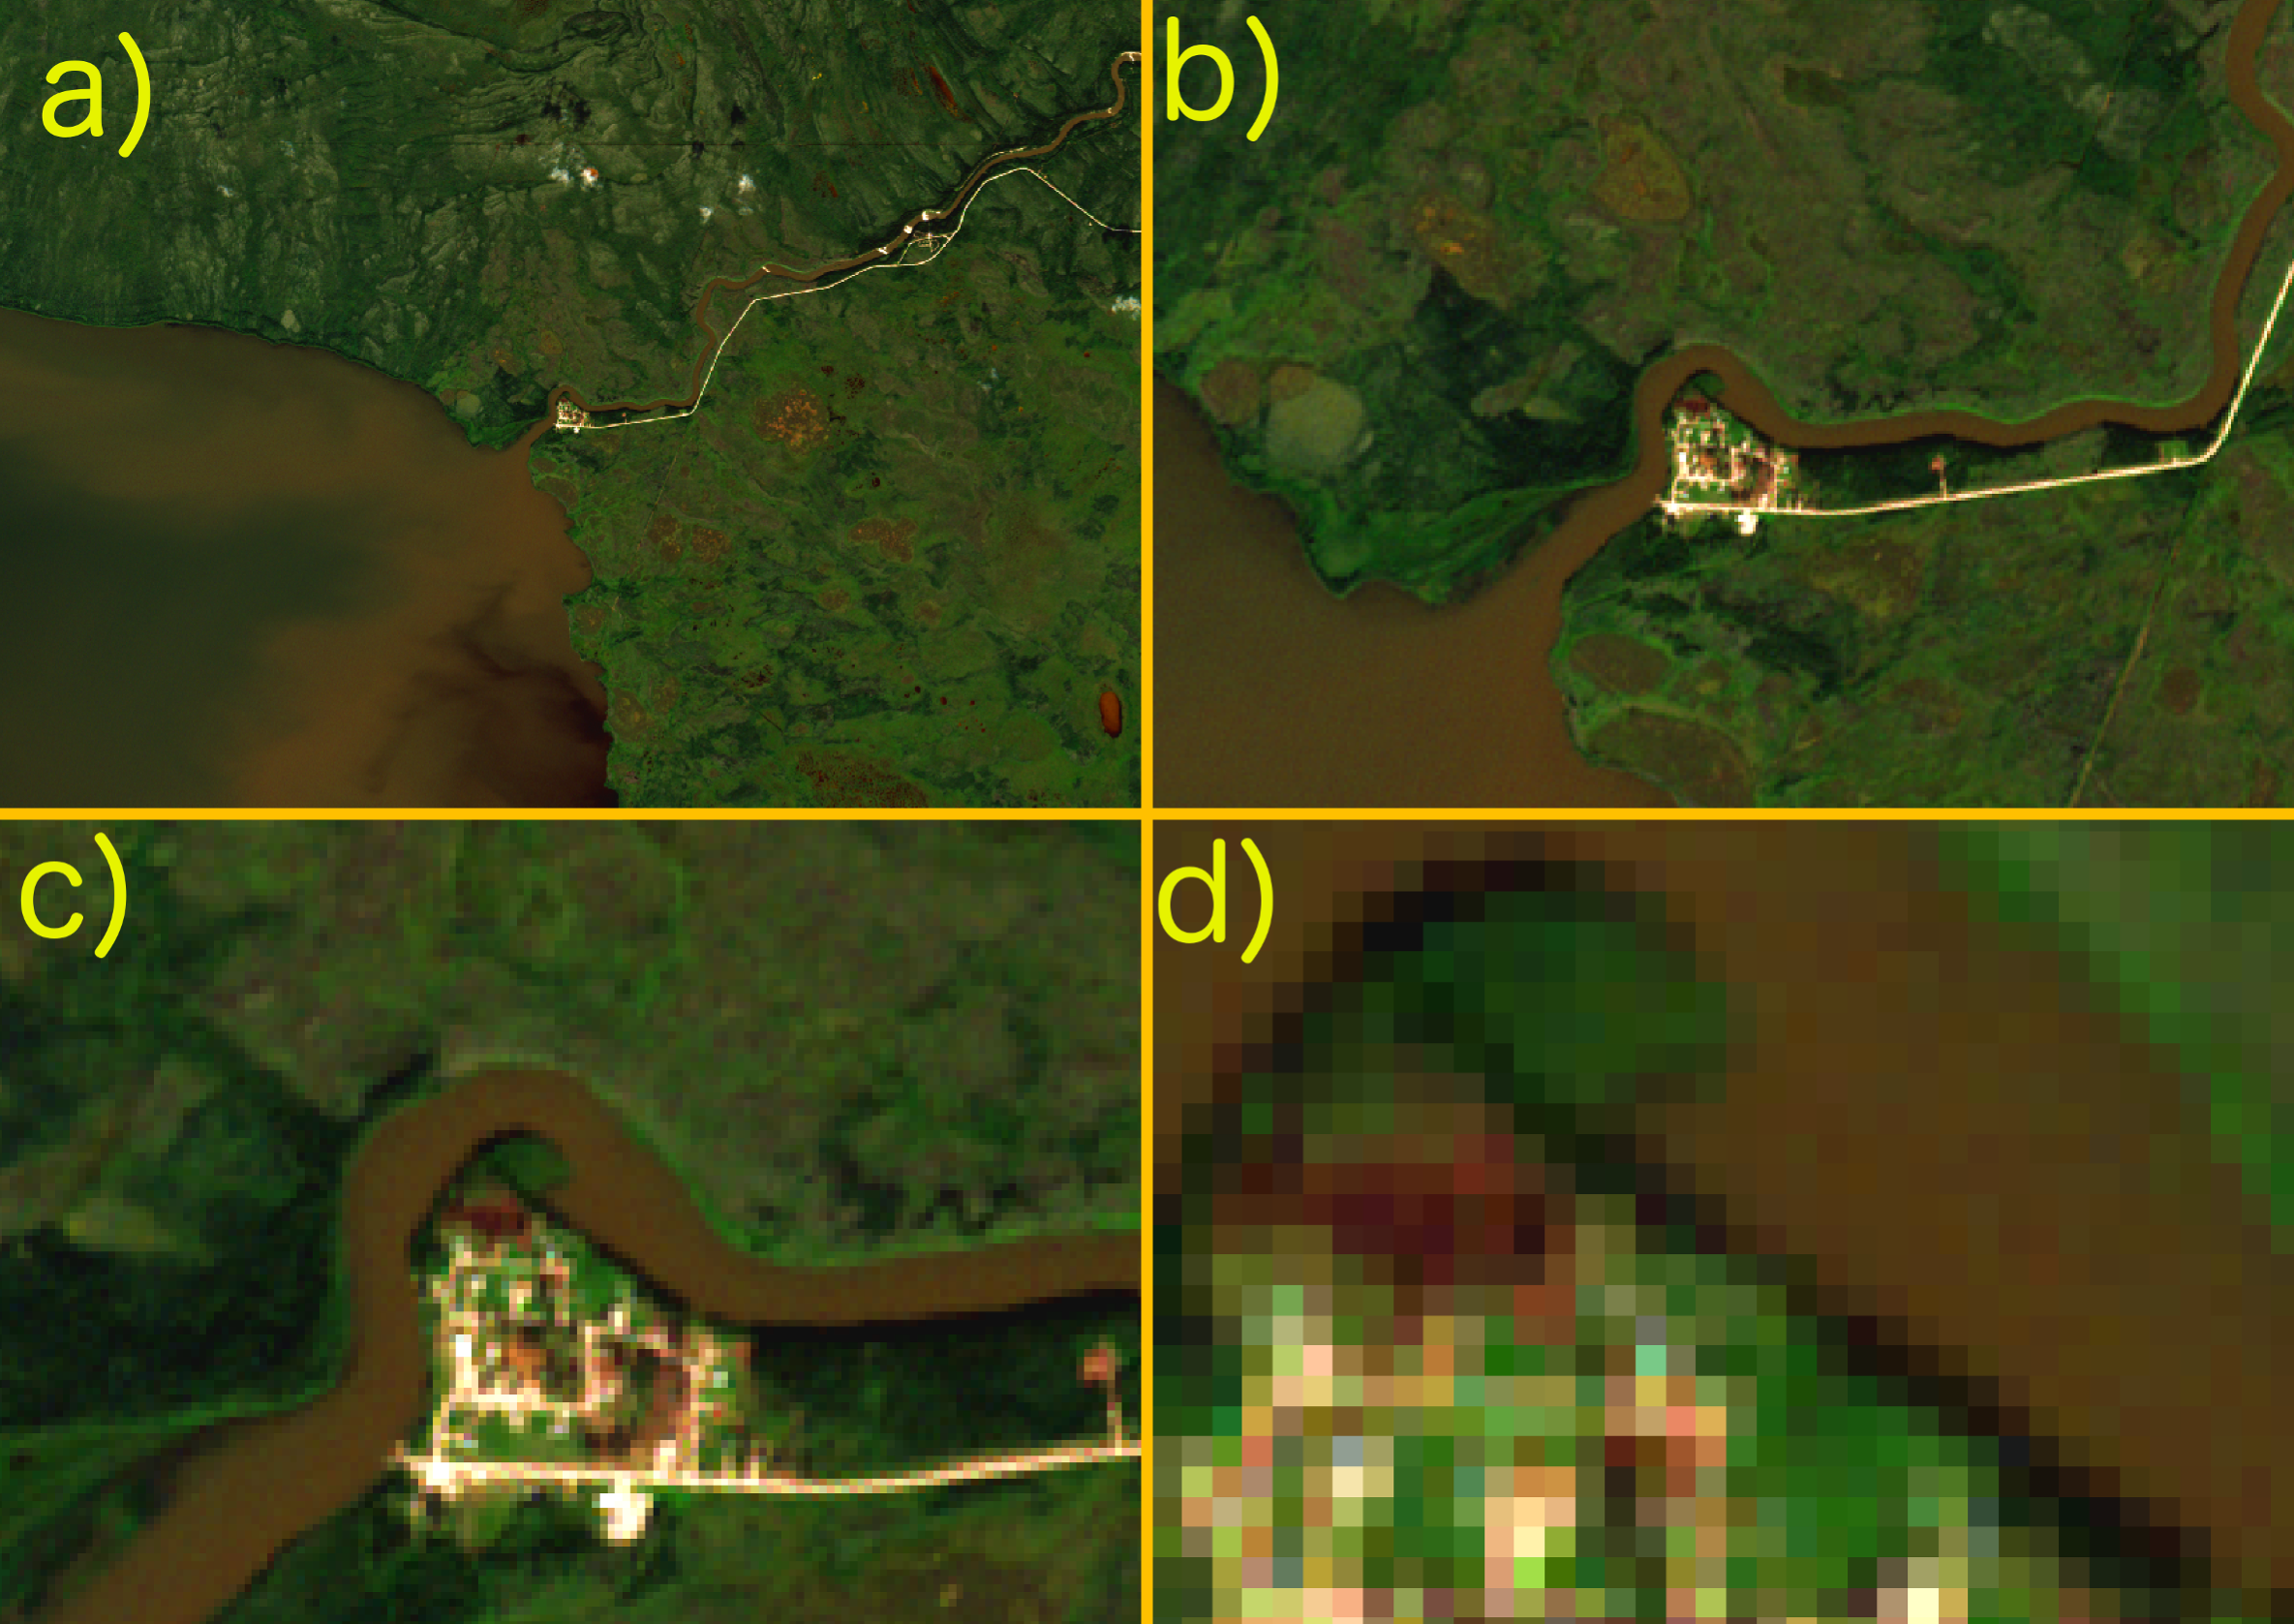 Sentinel-2 satellite image over Kakisa, Northwest Territories, visualized at relative resolutions of a) 1:100,000, b) 1:50,000, c) 1:10,000, and d) 1:2,500 